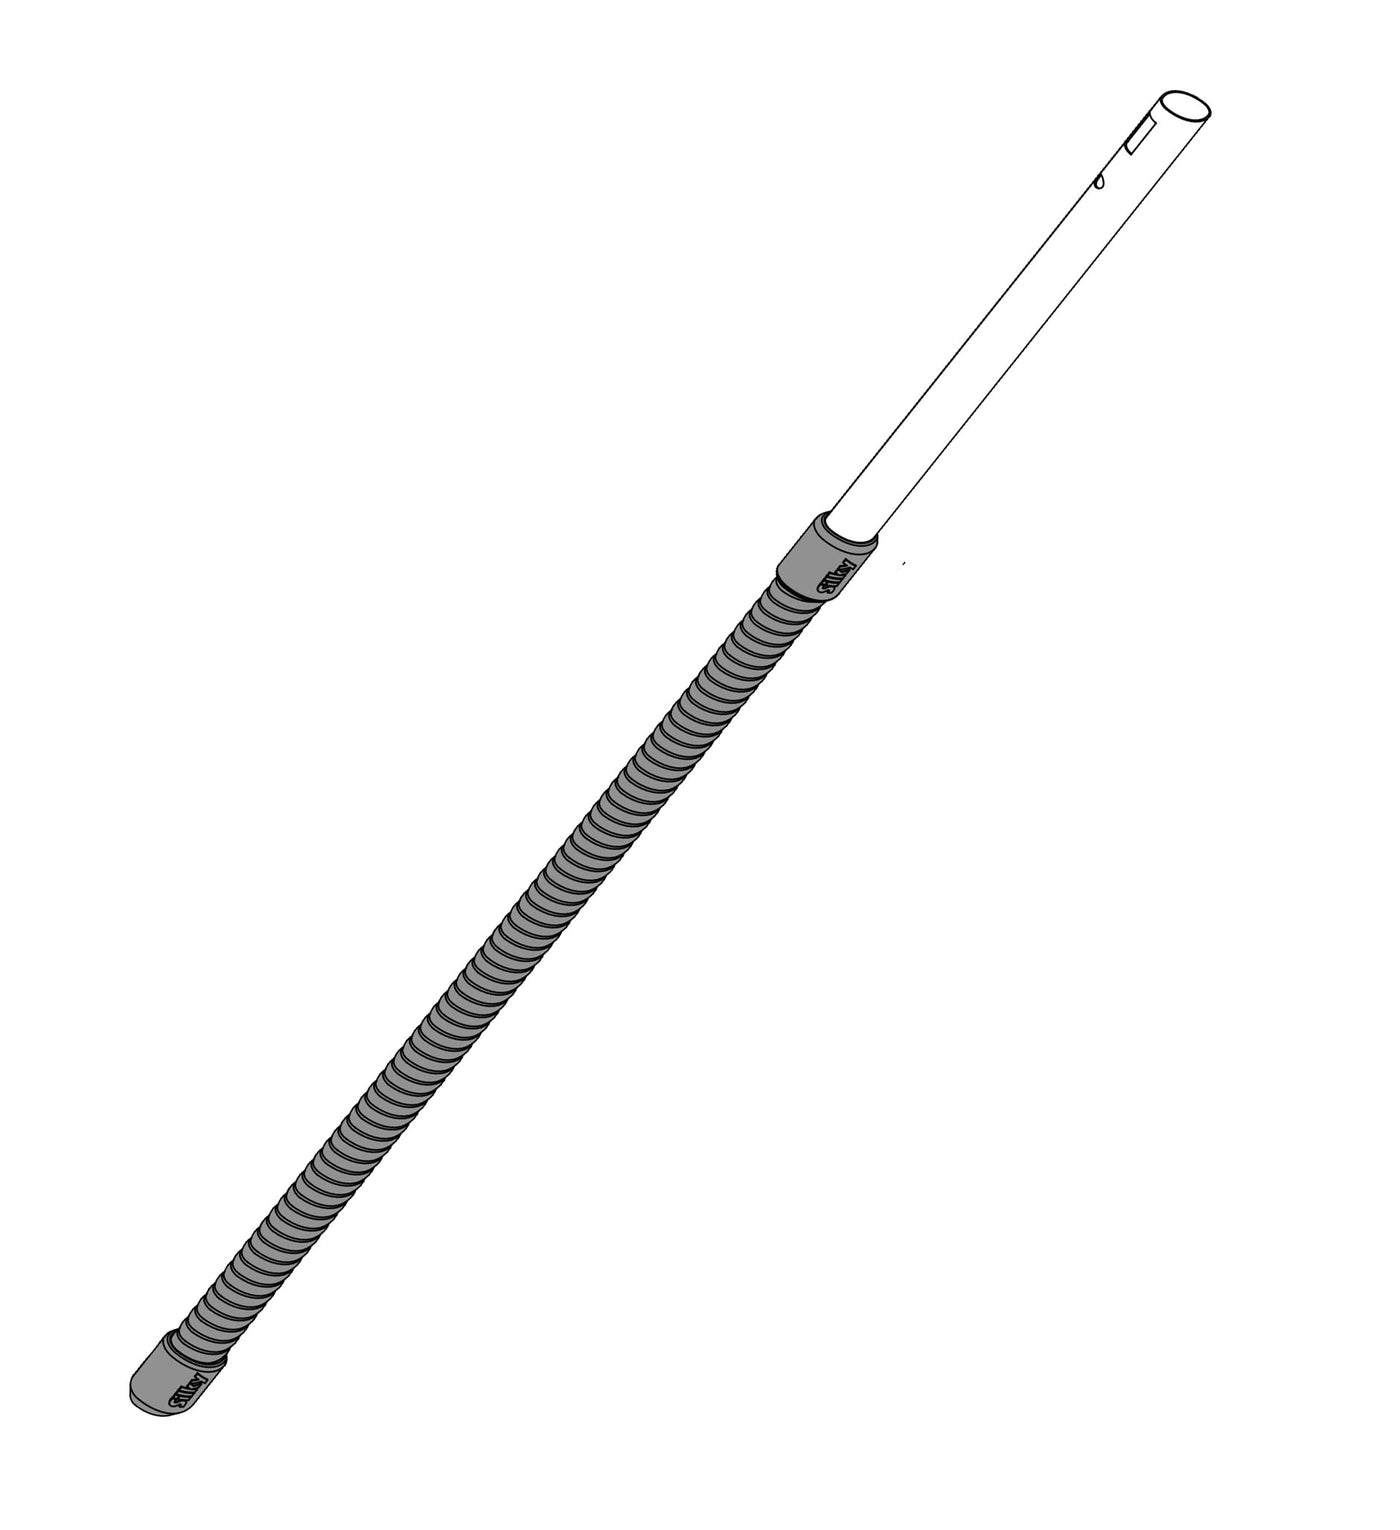 Silky Forester Pole Saw Pole (L) 4500